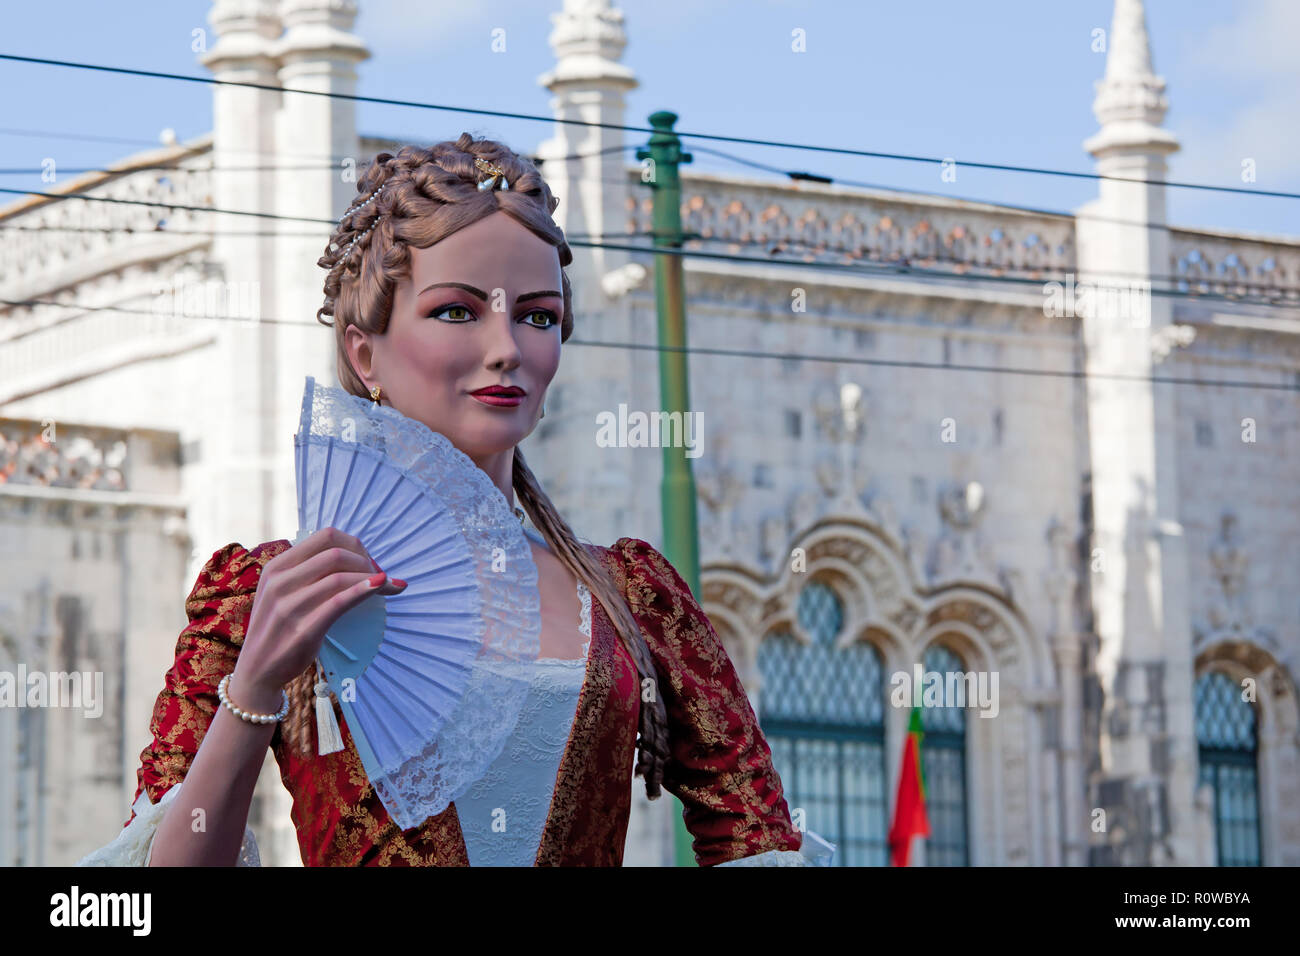 Parade of costumes and traditional masks of Iberia at the XII International Festival of Iberian Masks . Lisbon, Portugal - May 6, 2017: Stock Photo